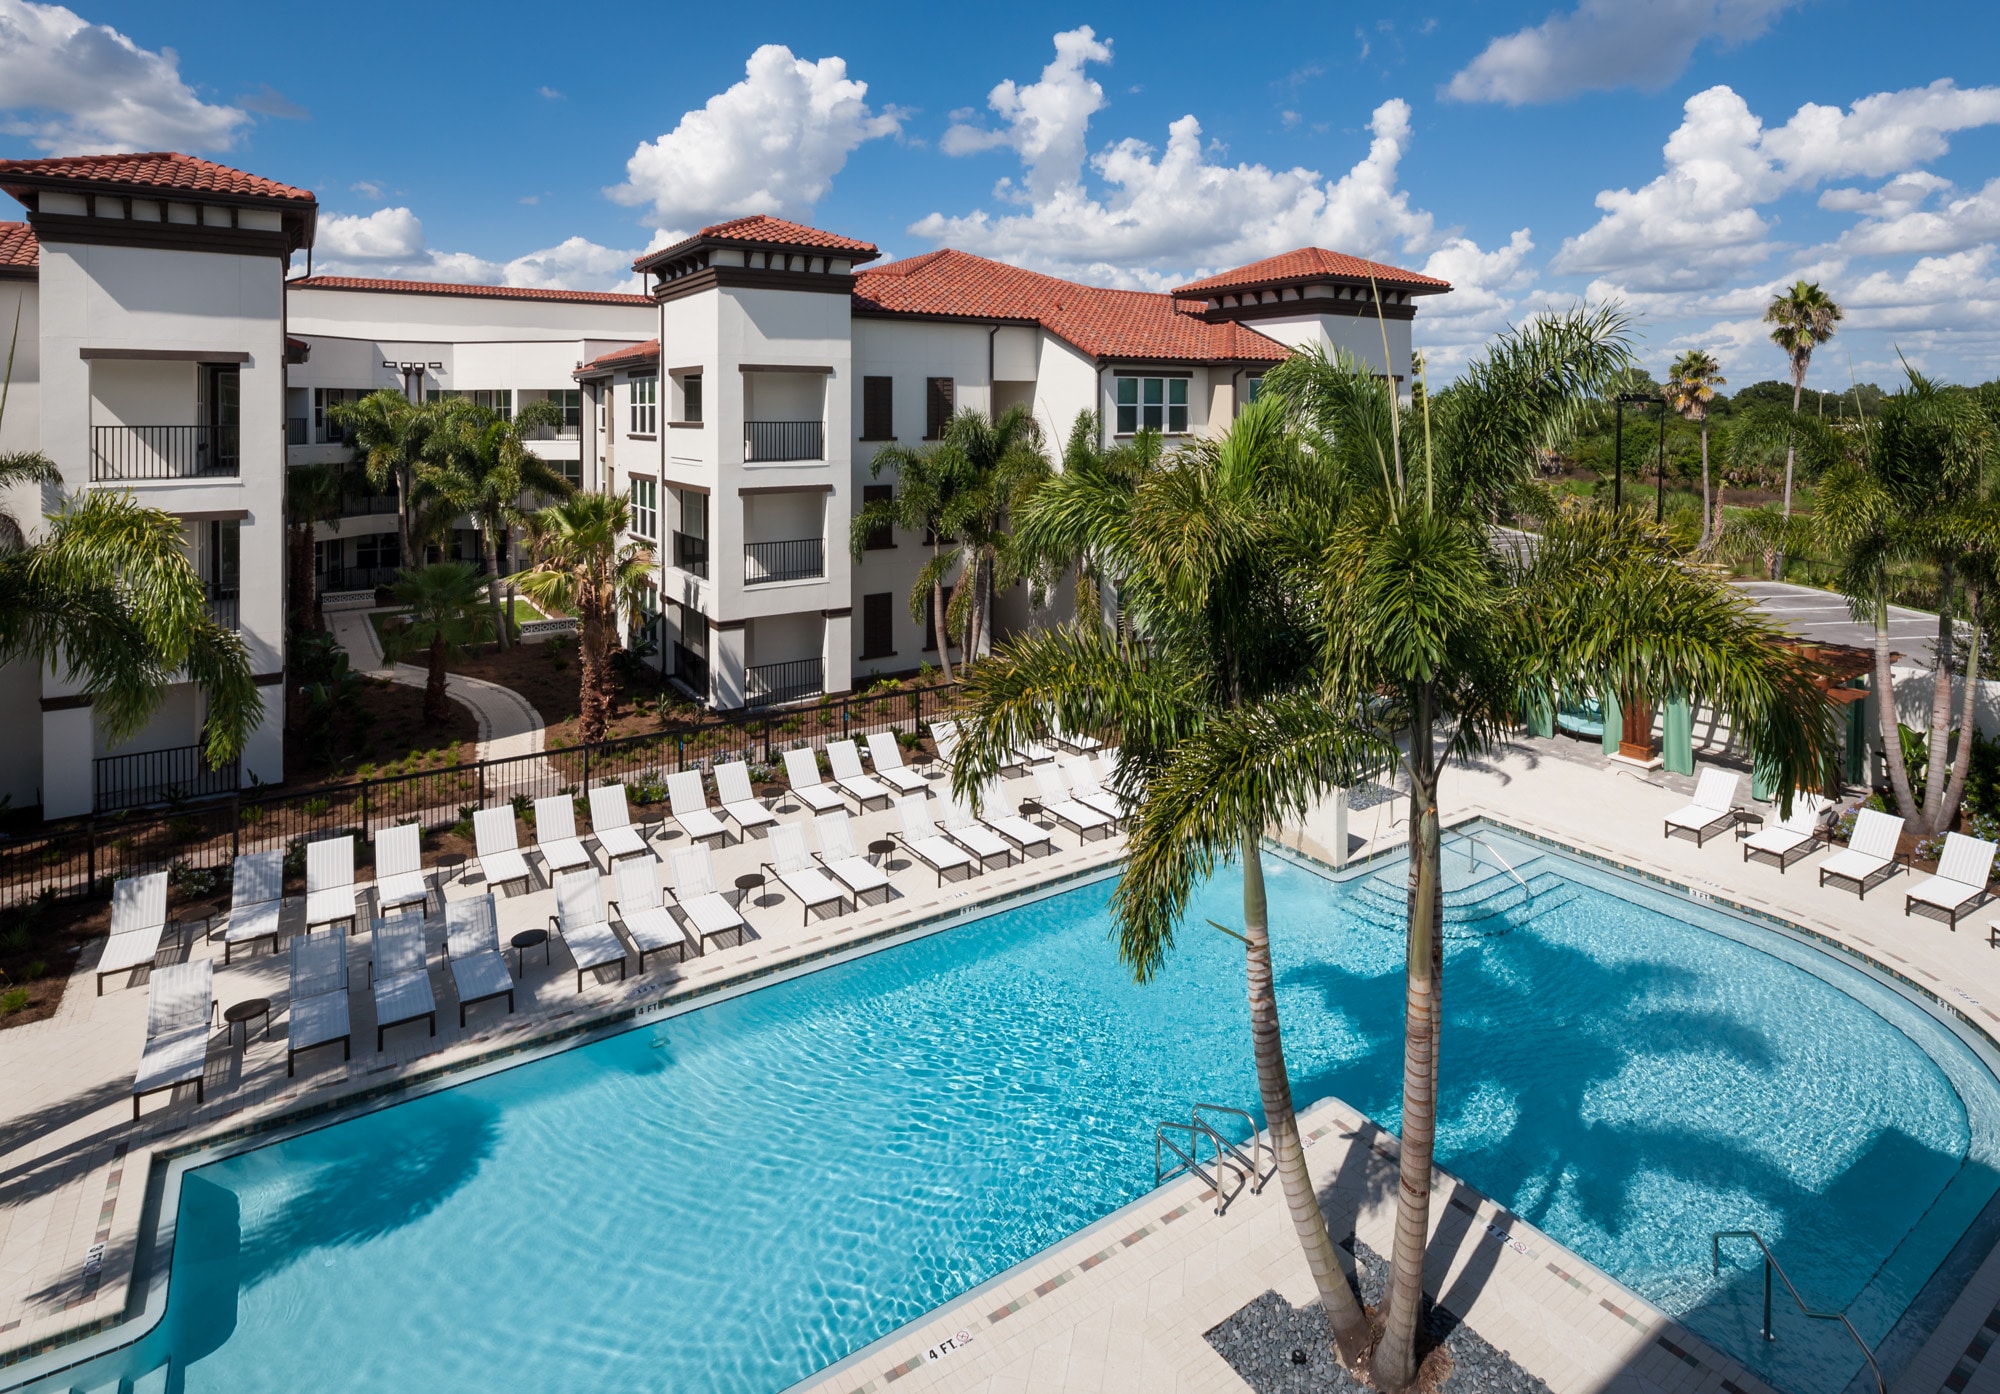 westshore resort style pool with chaise lounge chairs, palm trees, and view of apartment building and wooded area in the background - jefferson apartment group